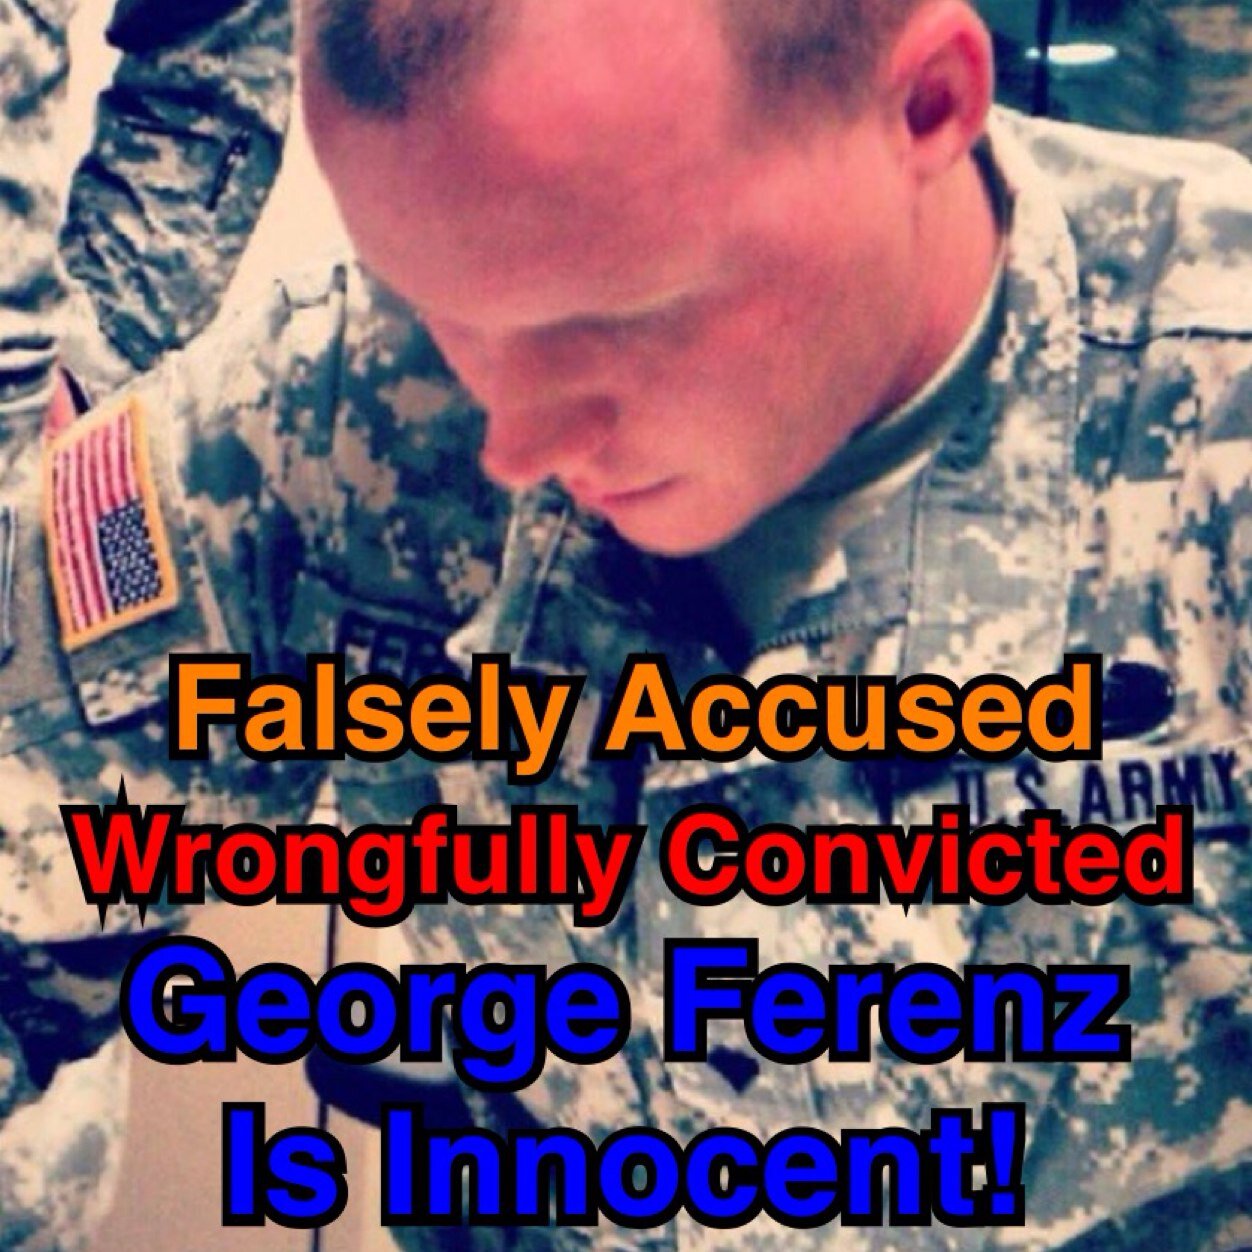 We strongly support this young father in his fight. False accusations and wrongful convictions threaten liberty for us all. George Ferenz is Innocent!